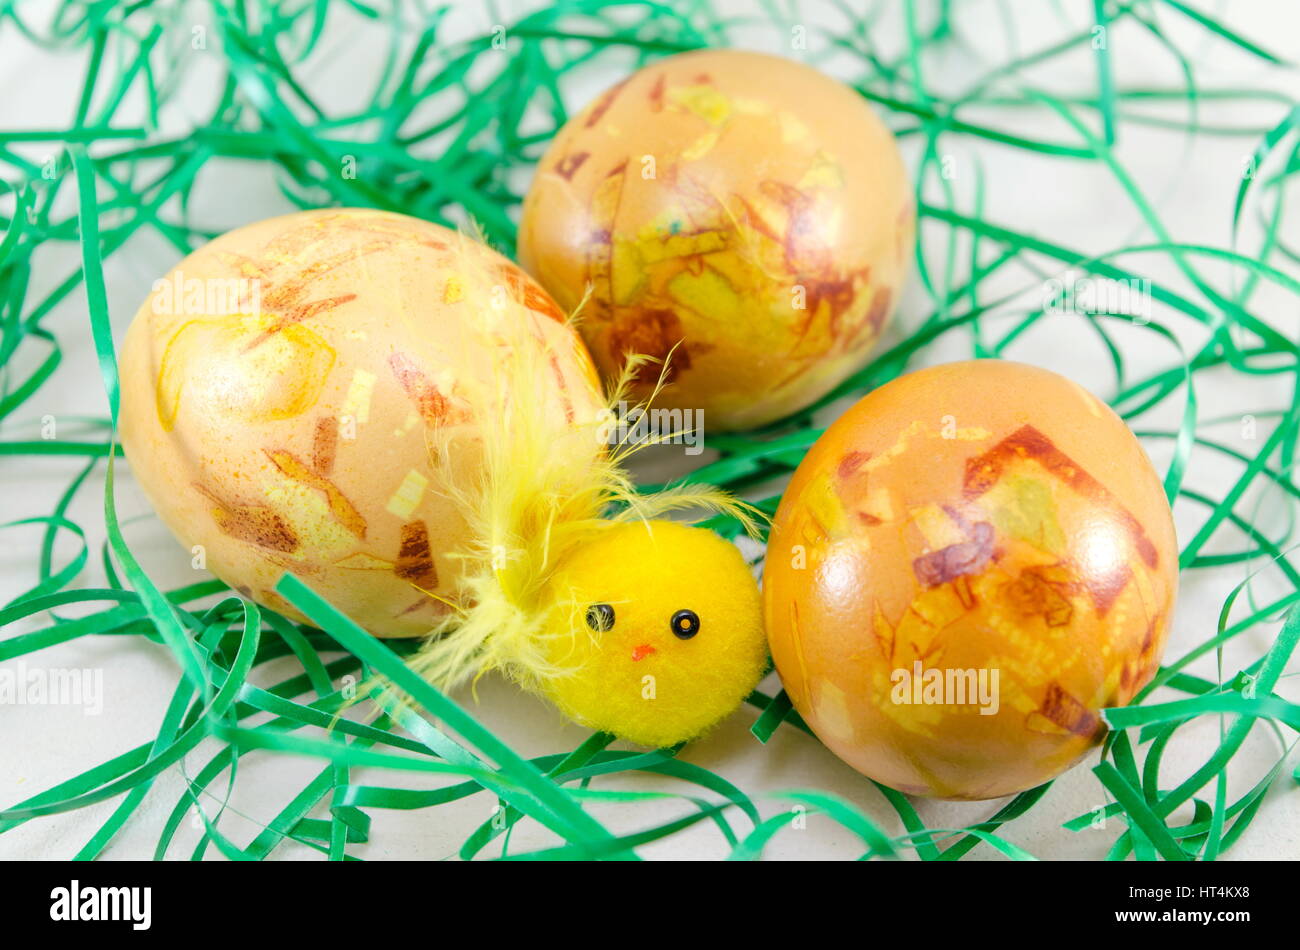 Decorated Easter eggs in green straw on a table Stock Photo